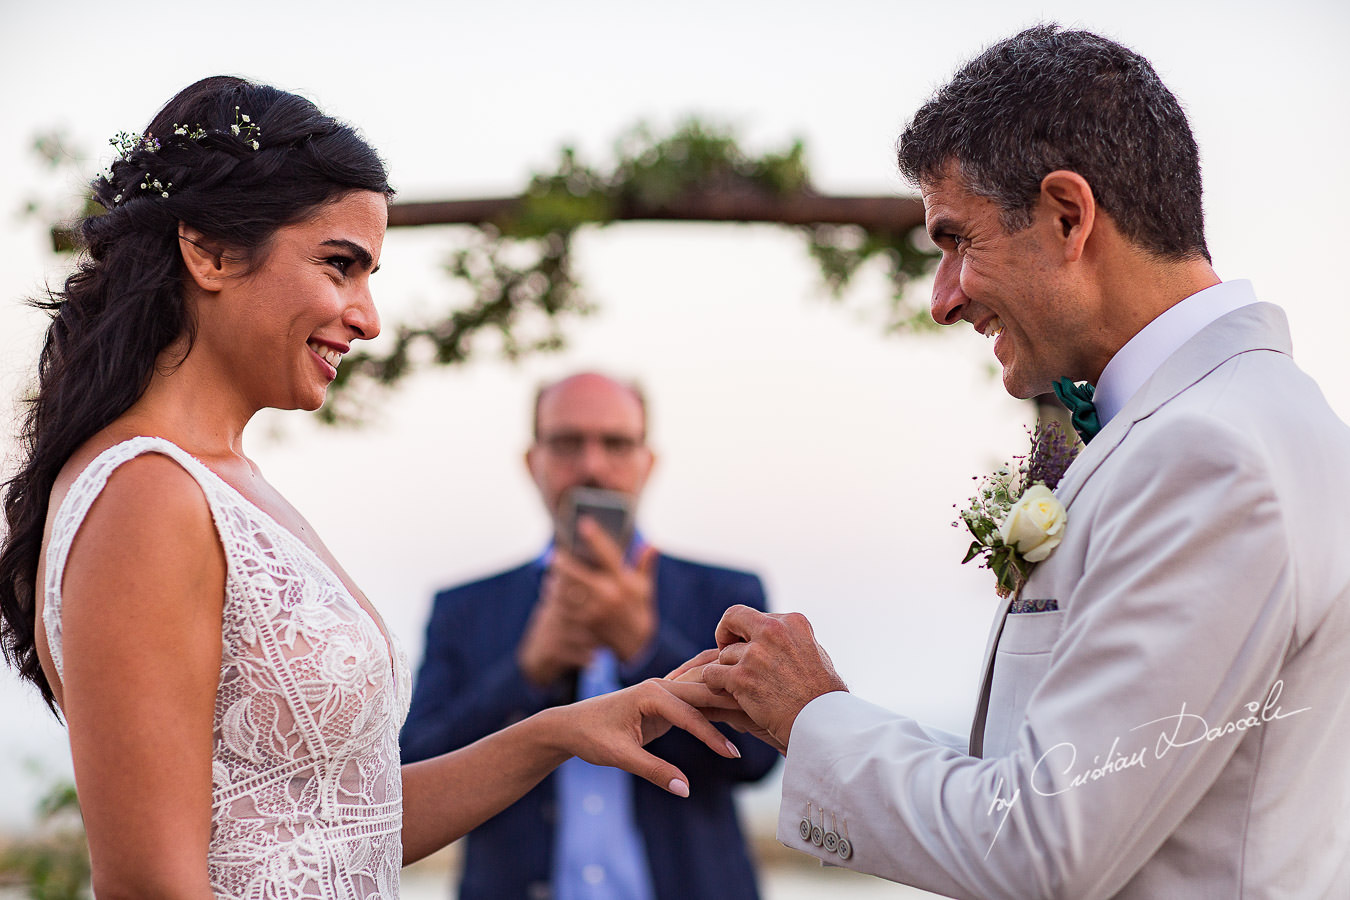 Moments with the bride and groom captured during a wedding photography at the Lighthouse Limassol, by Cyprus Photographer Cristian Dascalu.